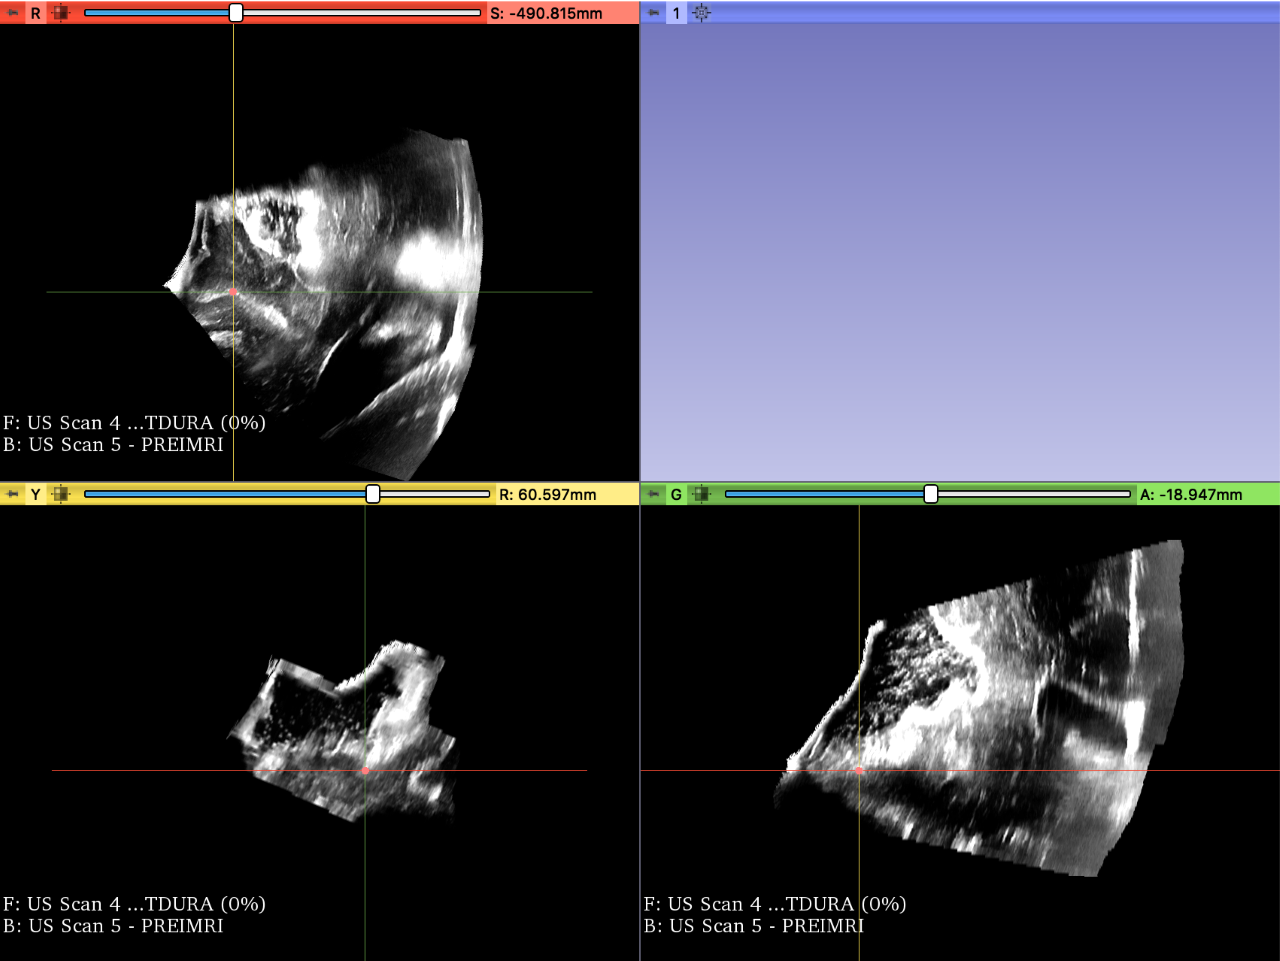 Screenshot of the pre-iMRI of the fiducial located on the sulcus 